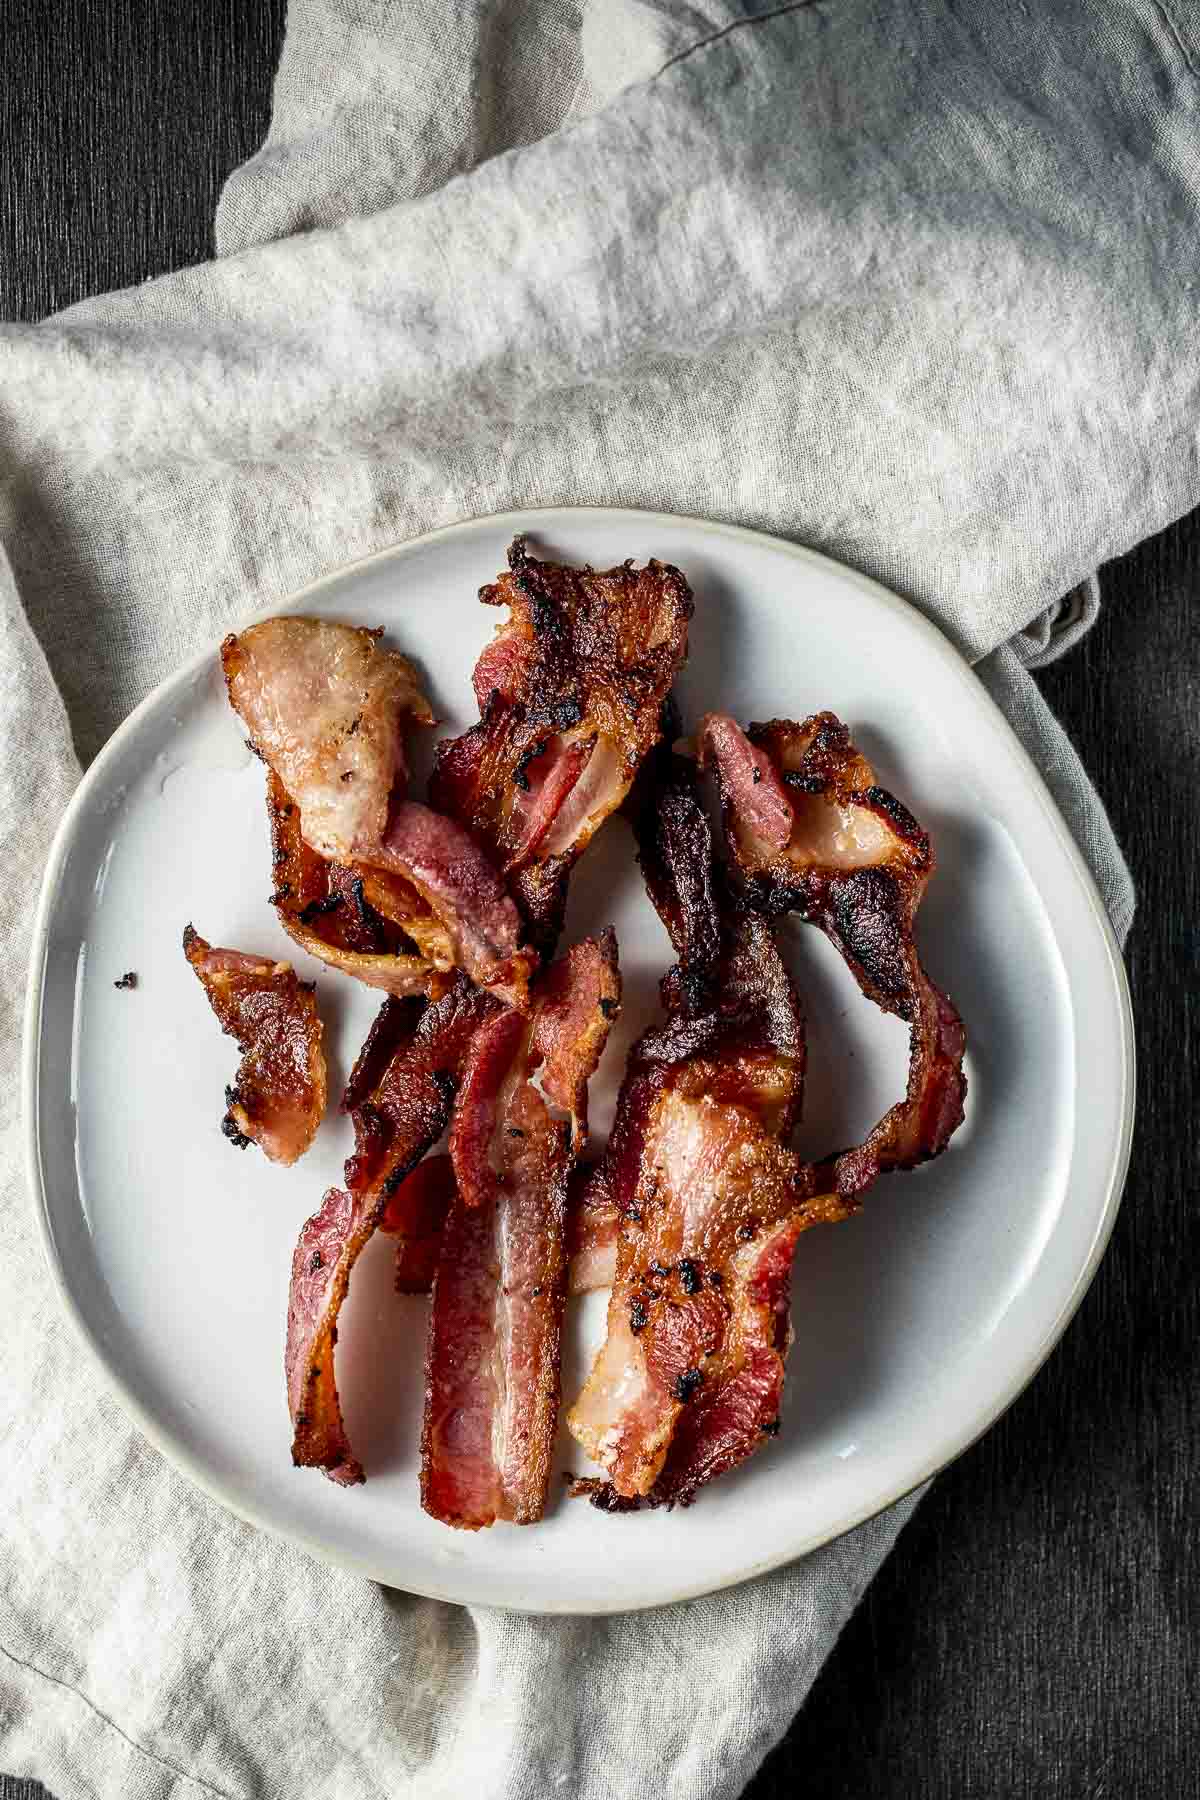 https://www.wenthere8this.com/wp-content/uploads/2022/03/sous-vide-bacon-4.jpg